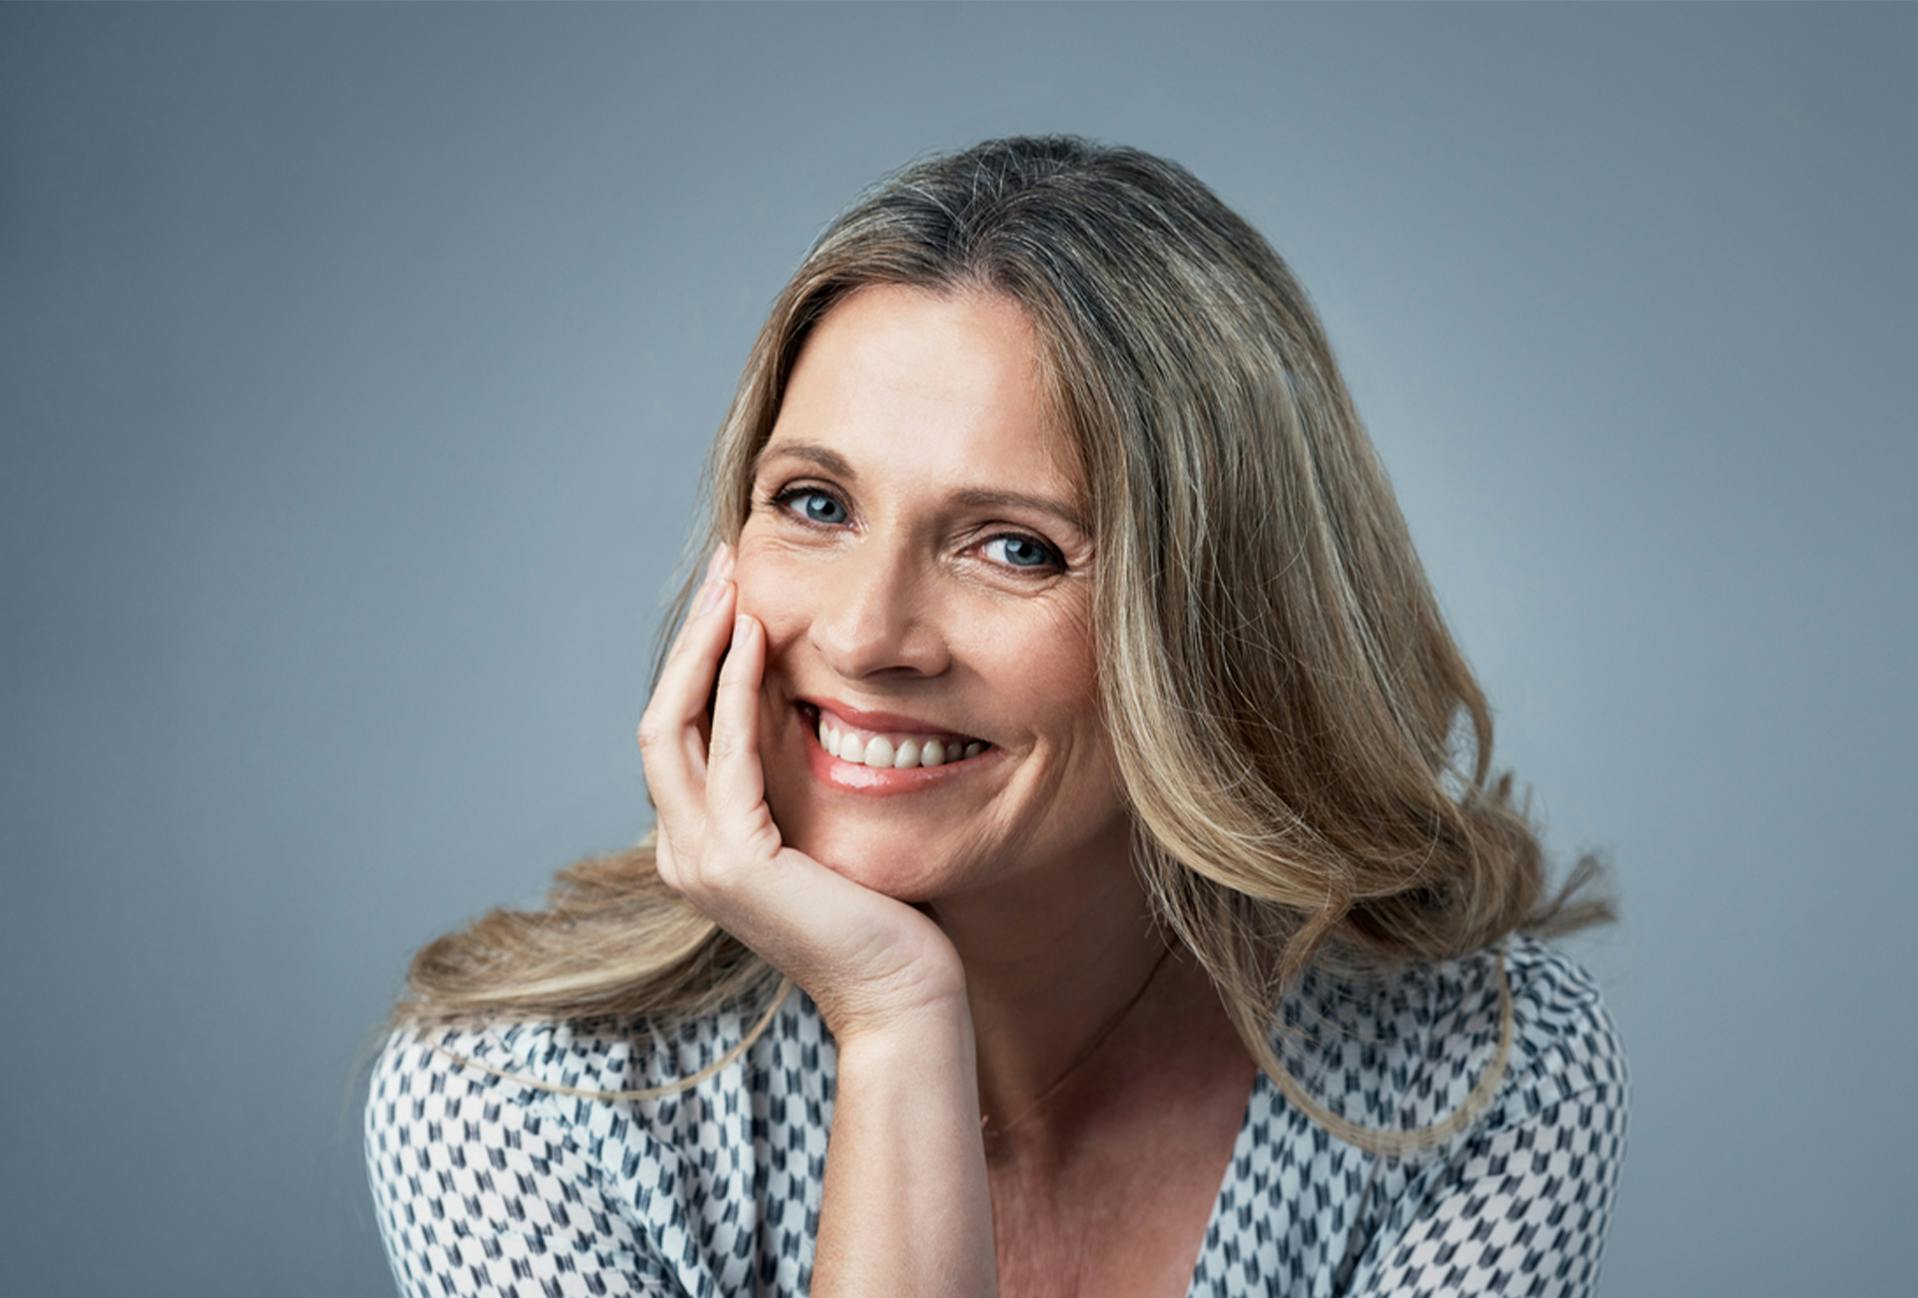 woman smiling while resting her face on her hand